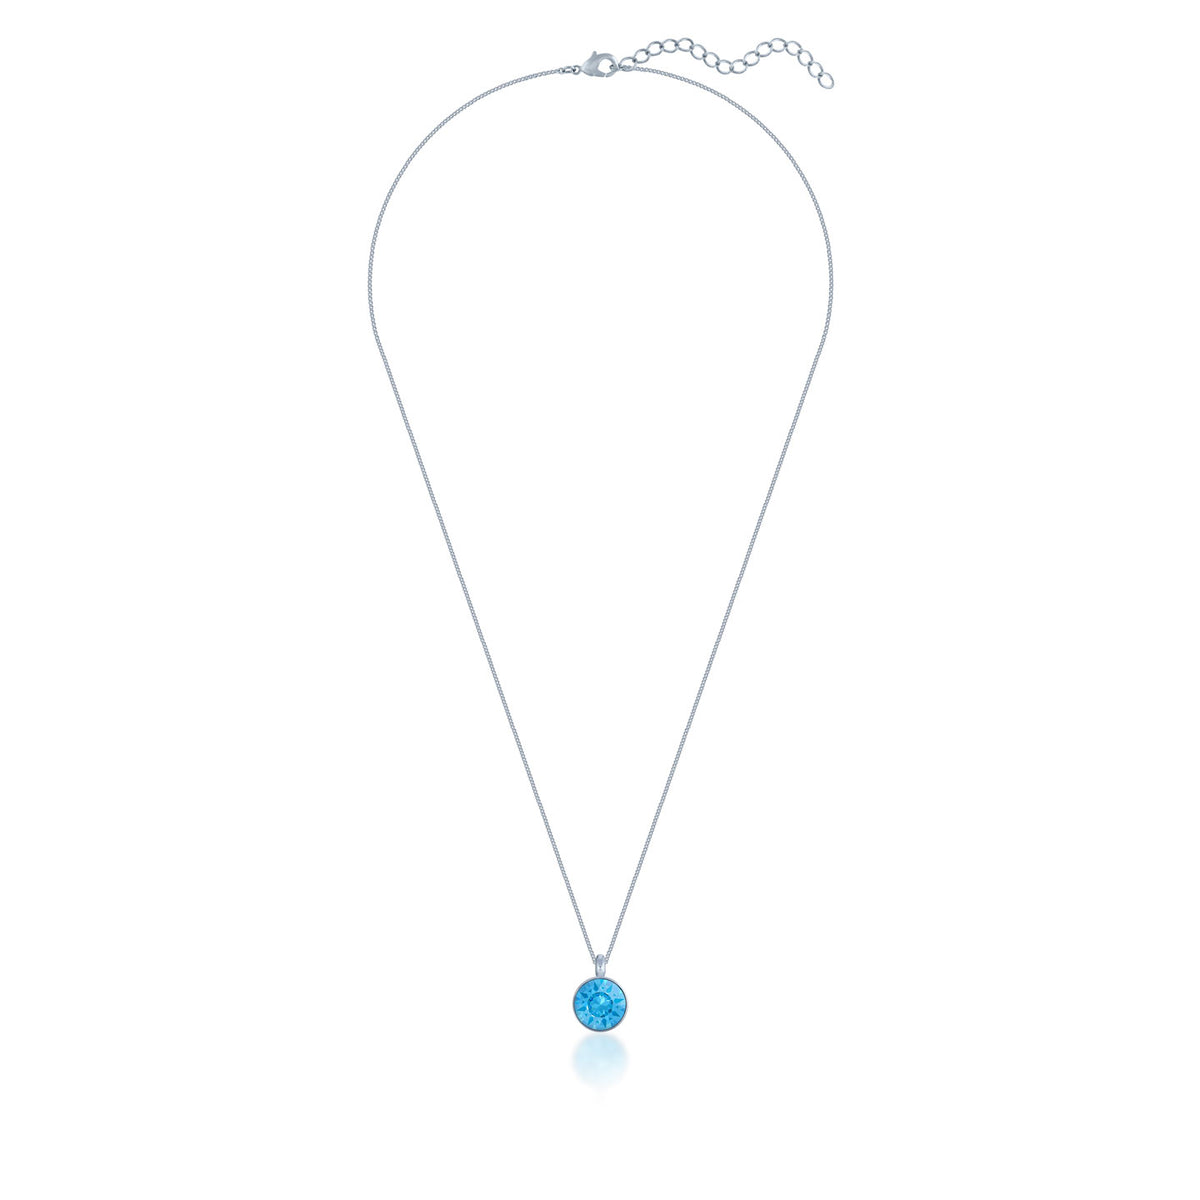 Bella Pendant Necklace with Blue Aquamarine Round Crystals from Swarovski Silver Toned Rhodium Plated - Ed Heart